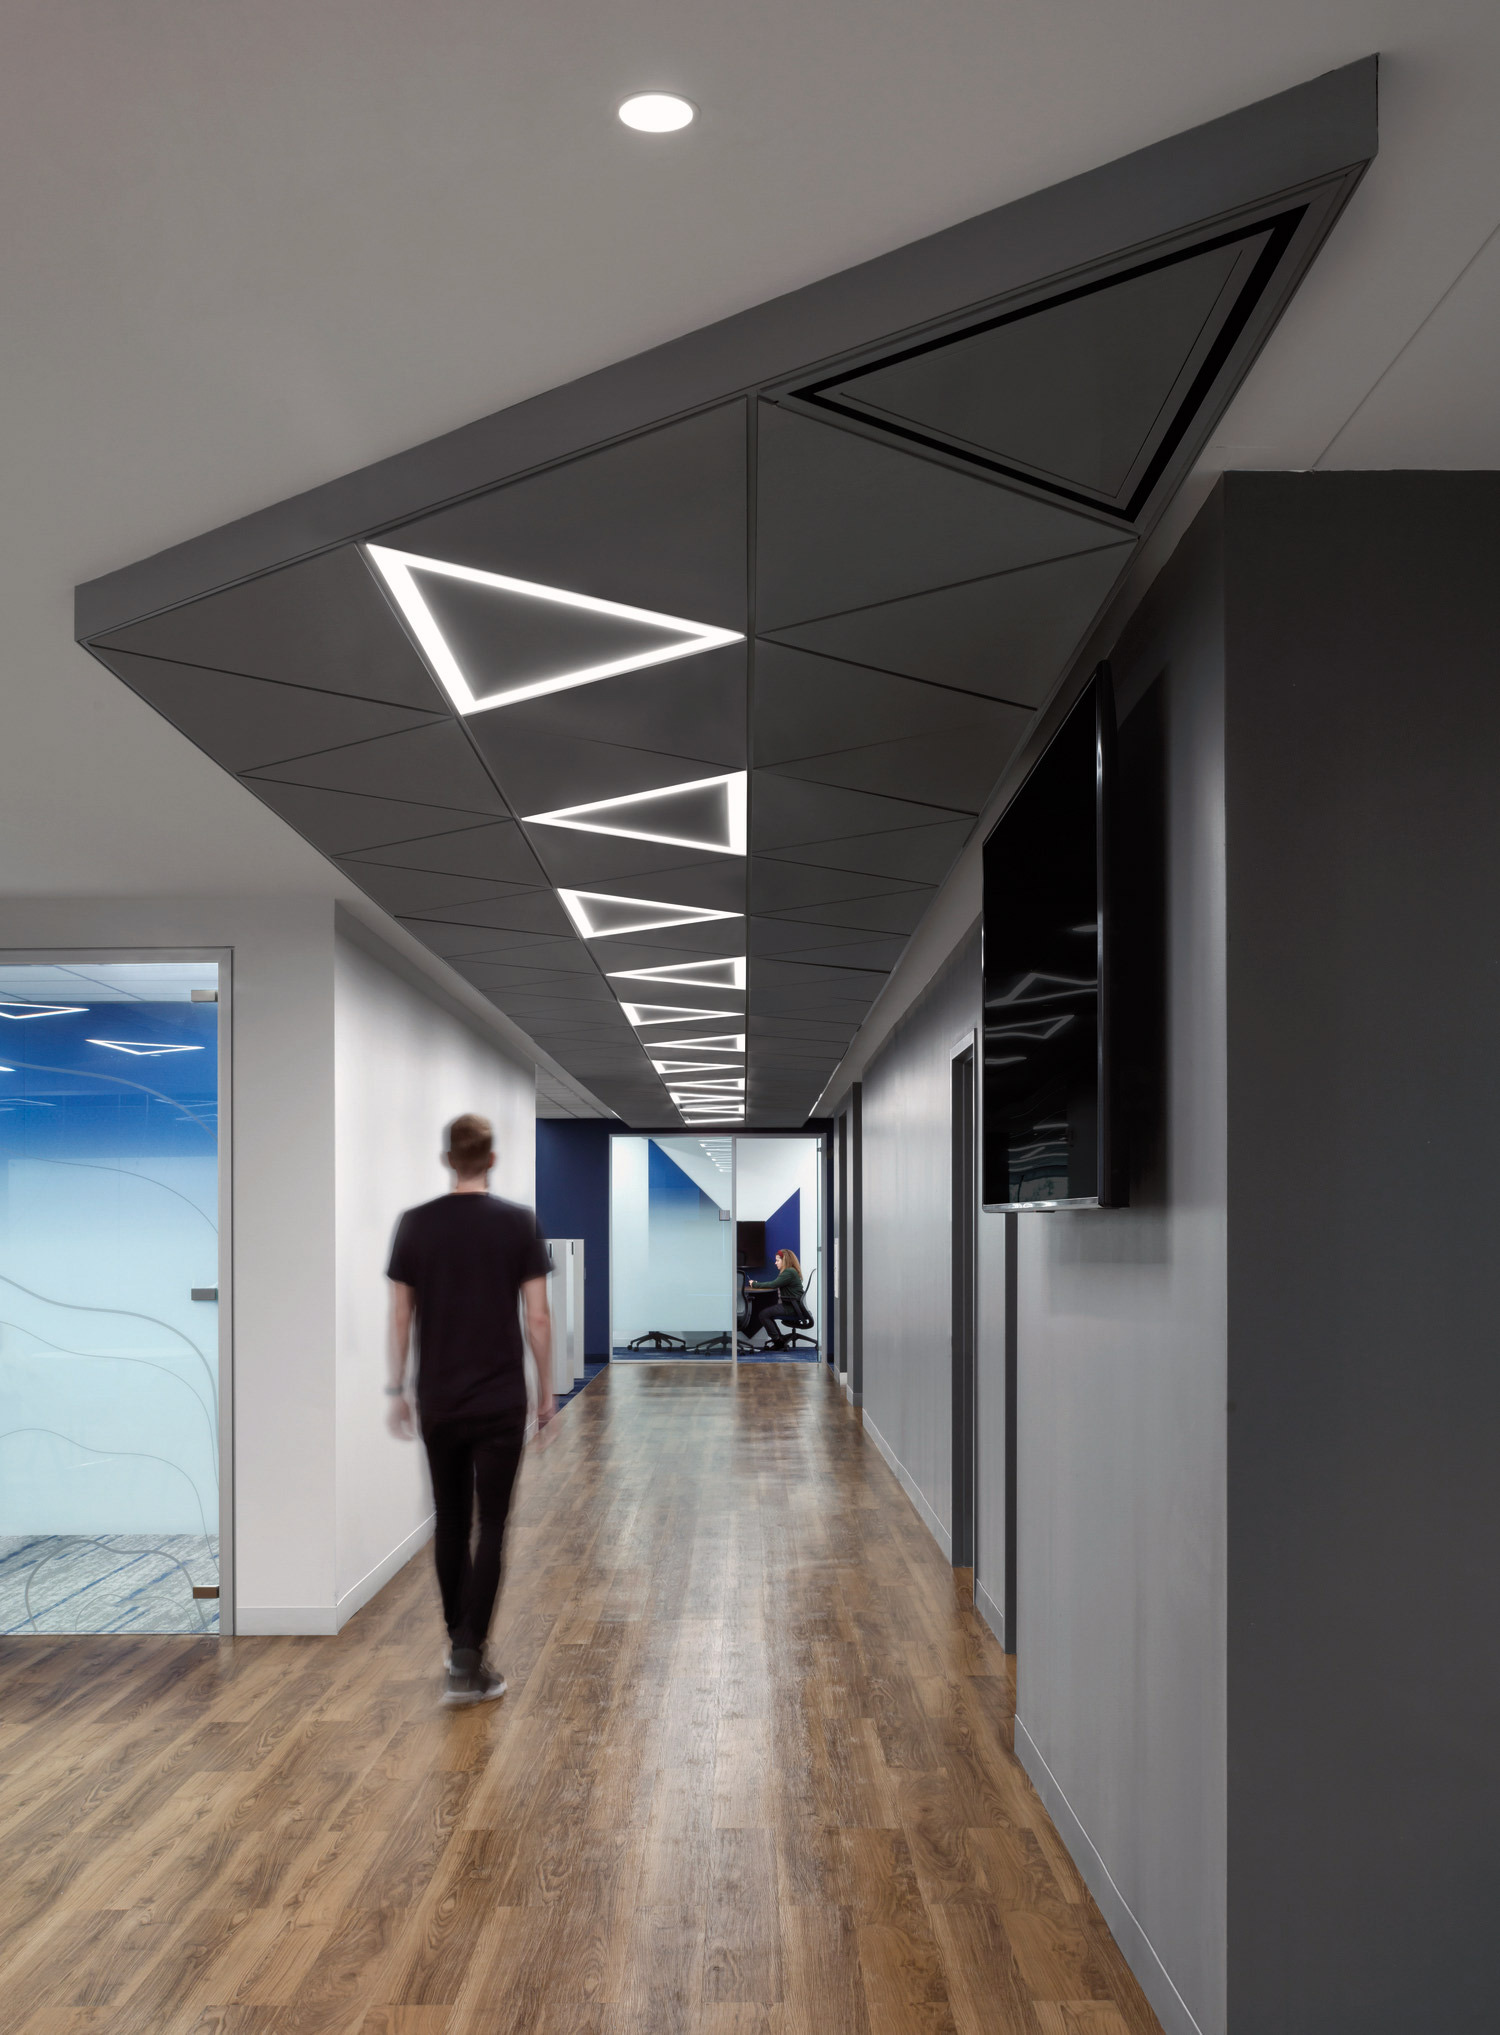 Modern office corridor featuring geometric ceiling with integrated triangular lighting, sleek black panels, polished wooden flooring, and clear glass doors revealing a hint of the vibrant workspace within.